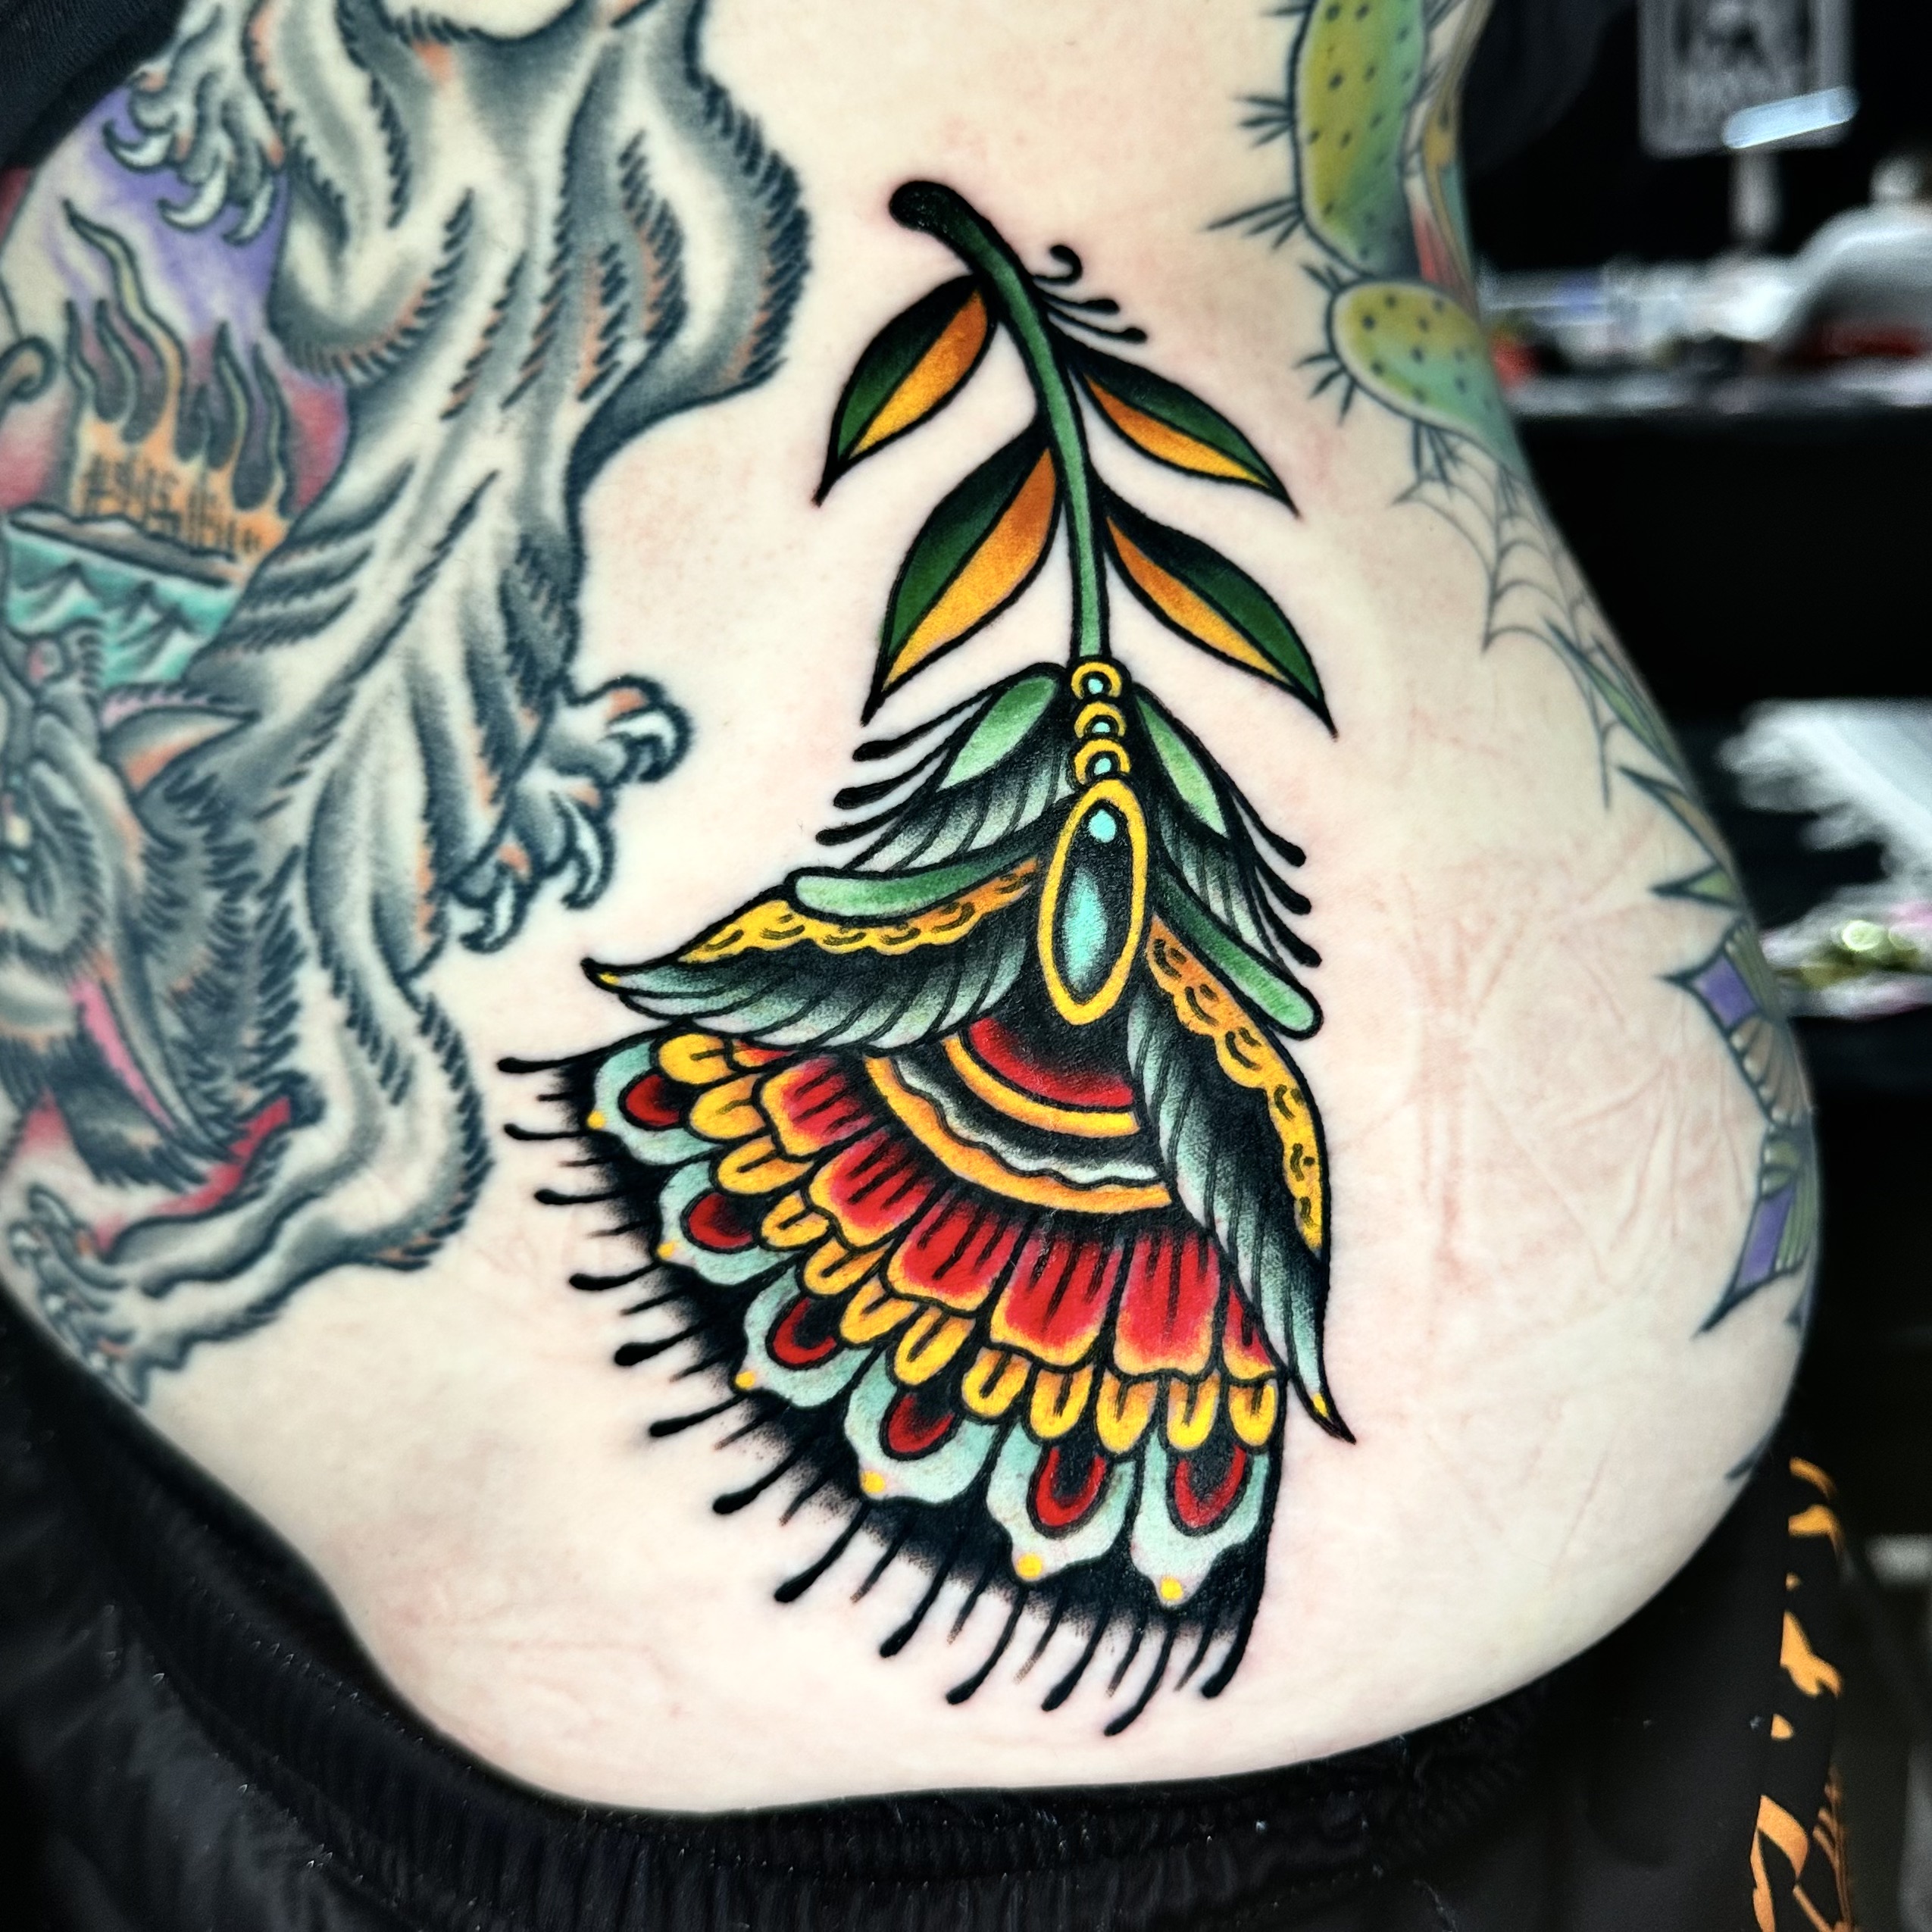 Tattoo of a feather flower